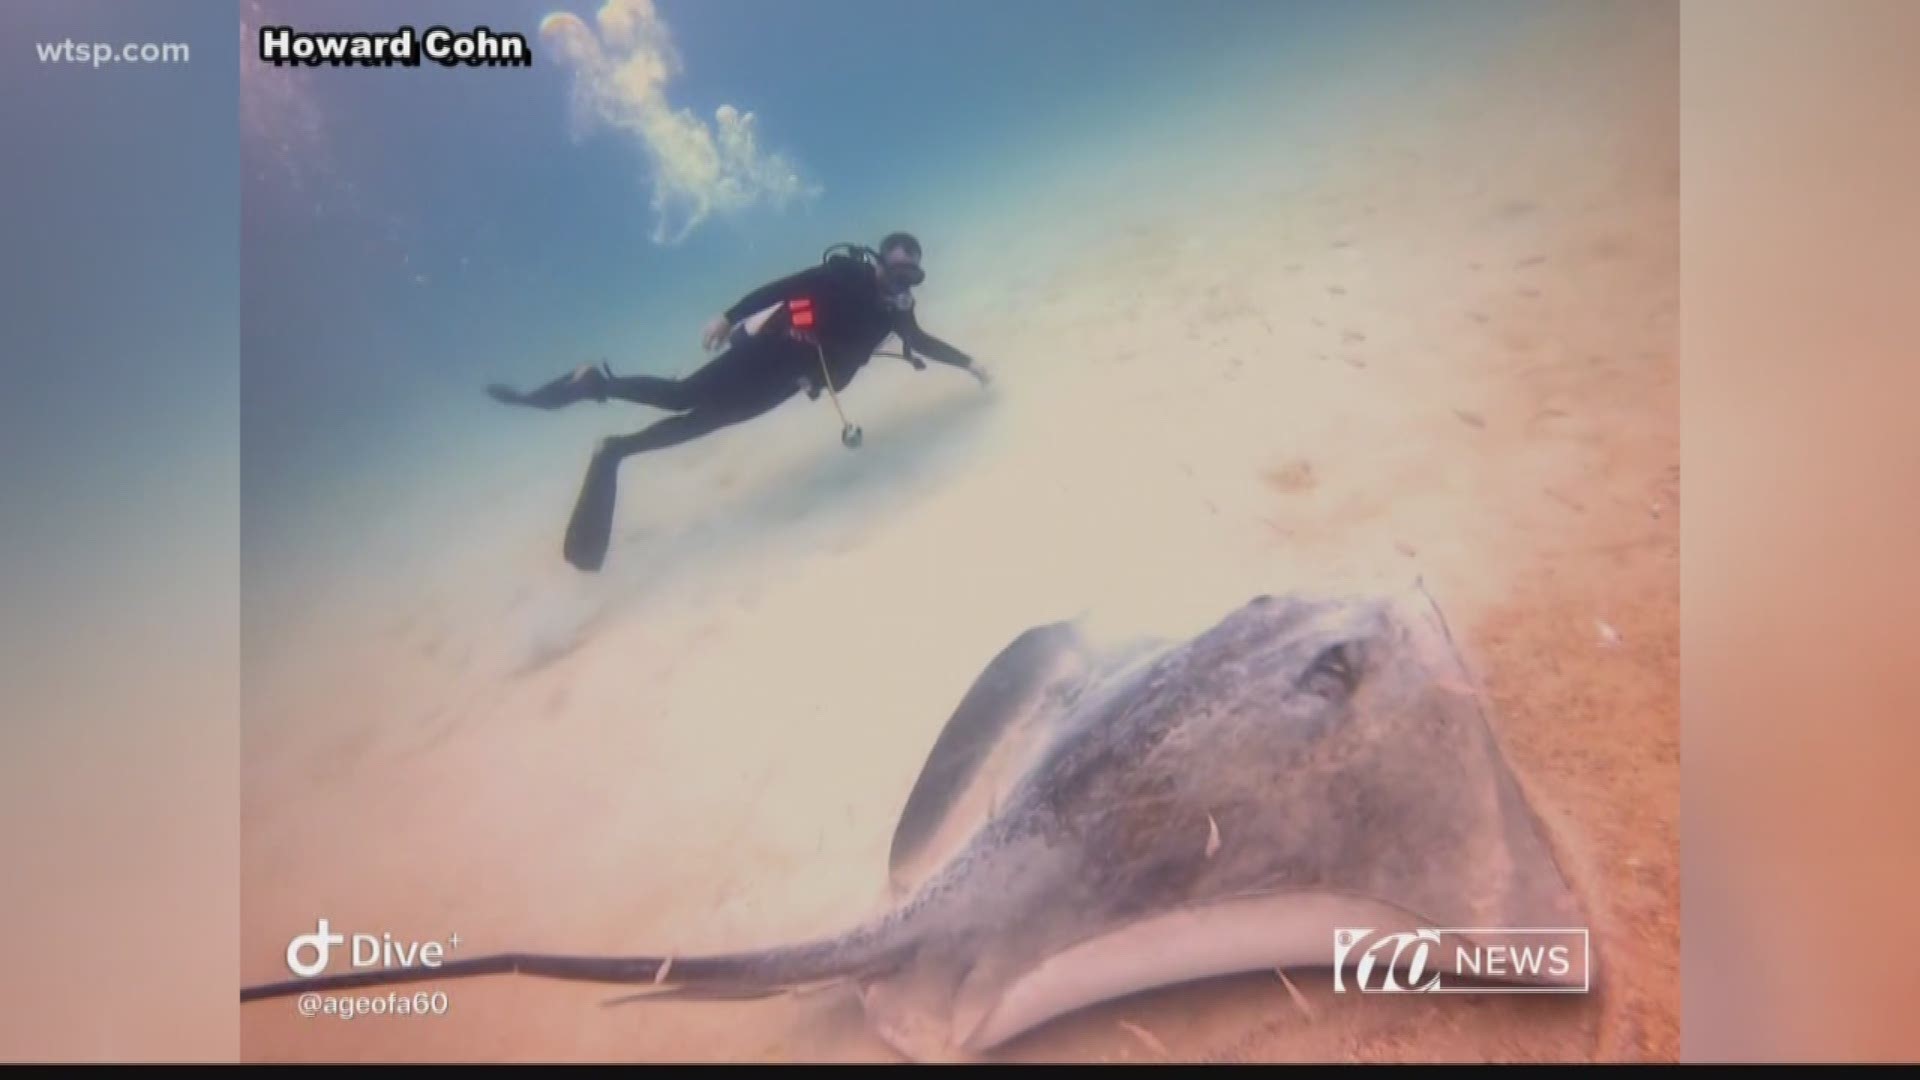 The massive ray was found while diving off Tarpon Springs.